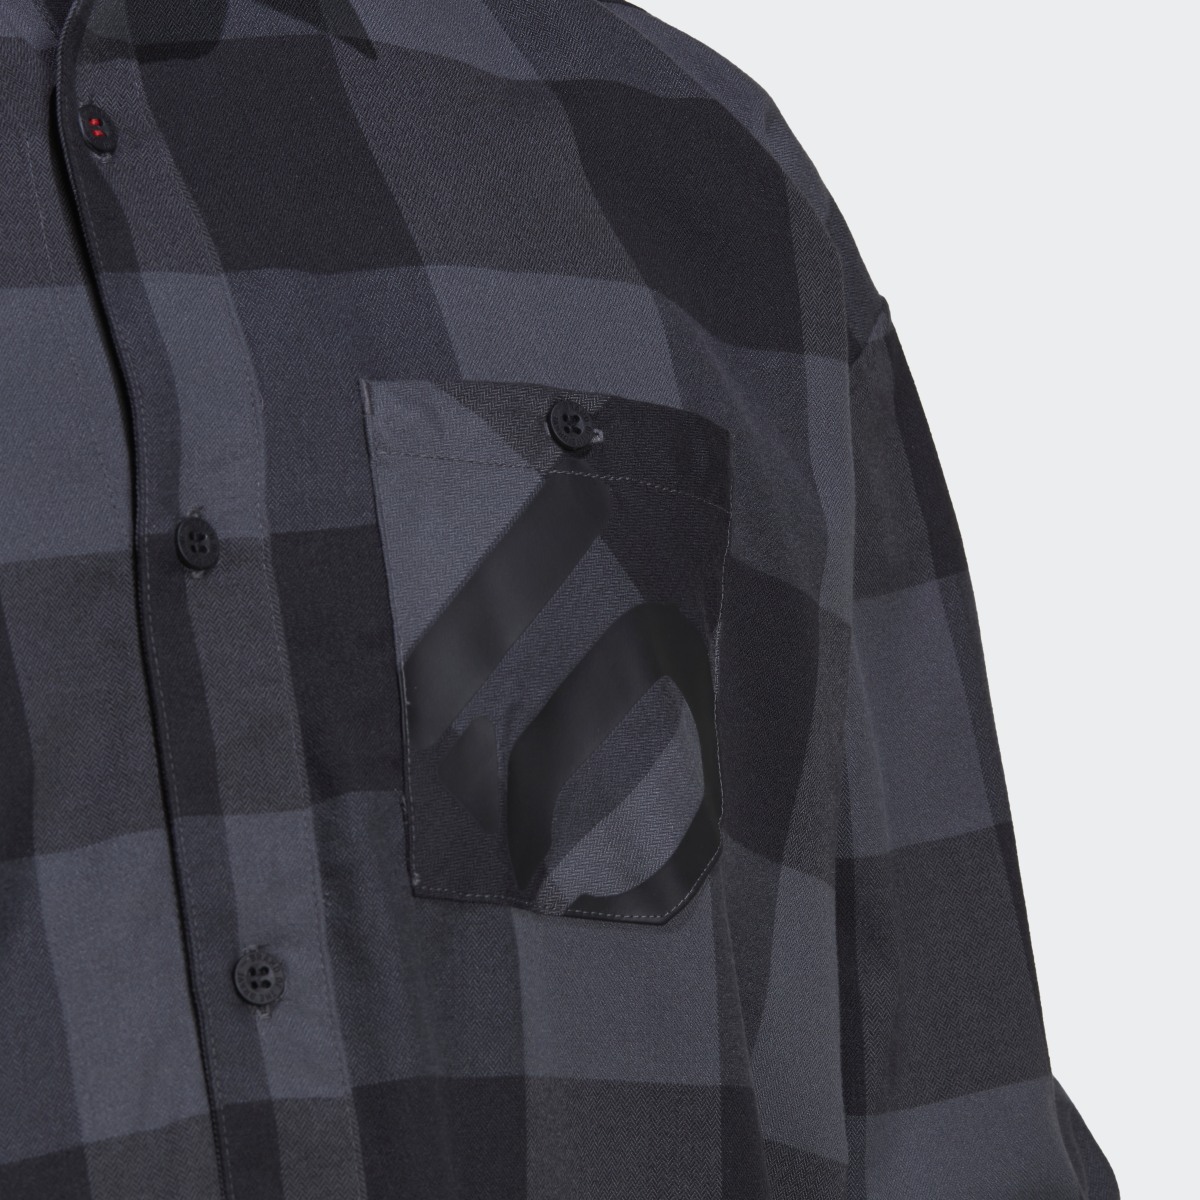 Adidas Five Ten Brand of the Brave Flannel Shirt (uniseks). 6